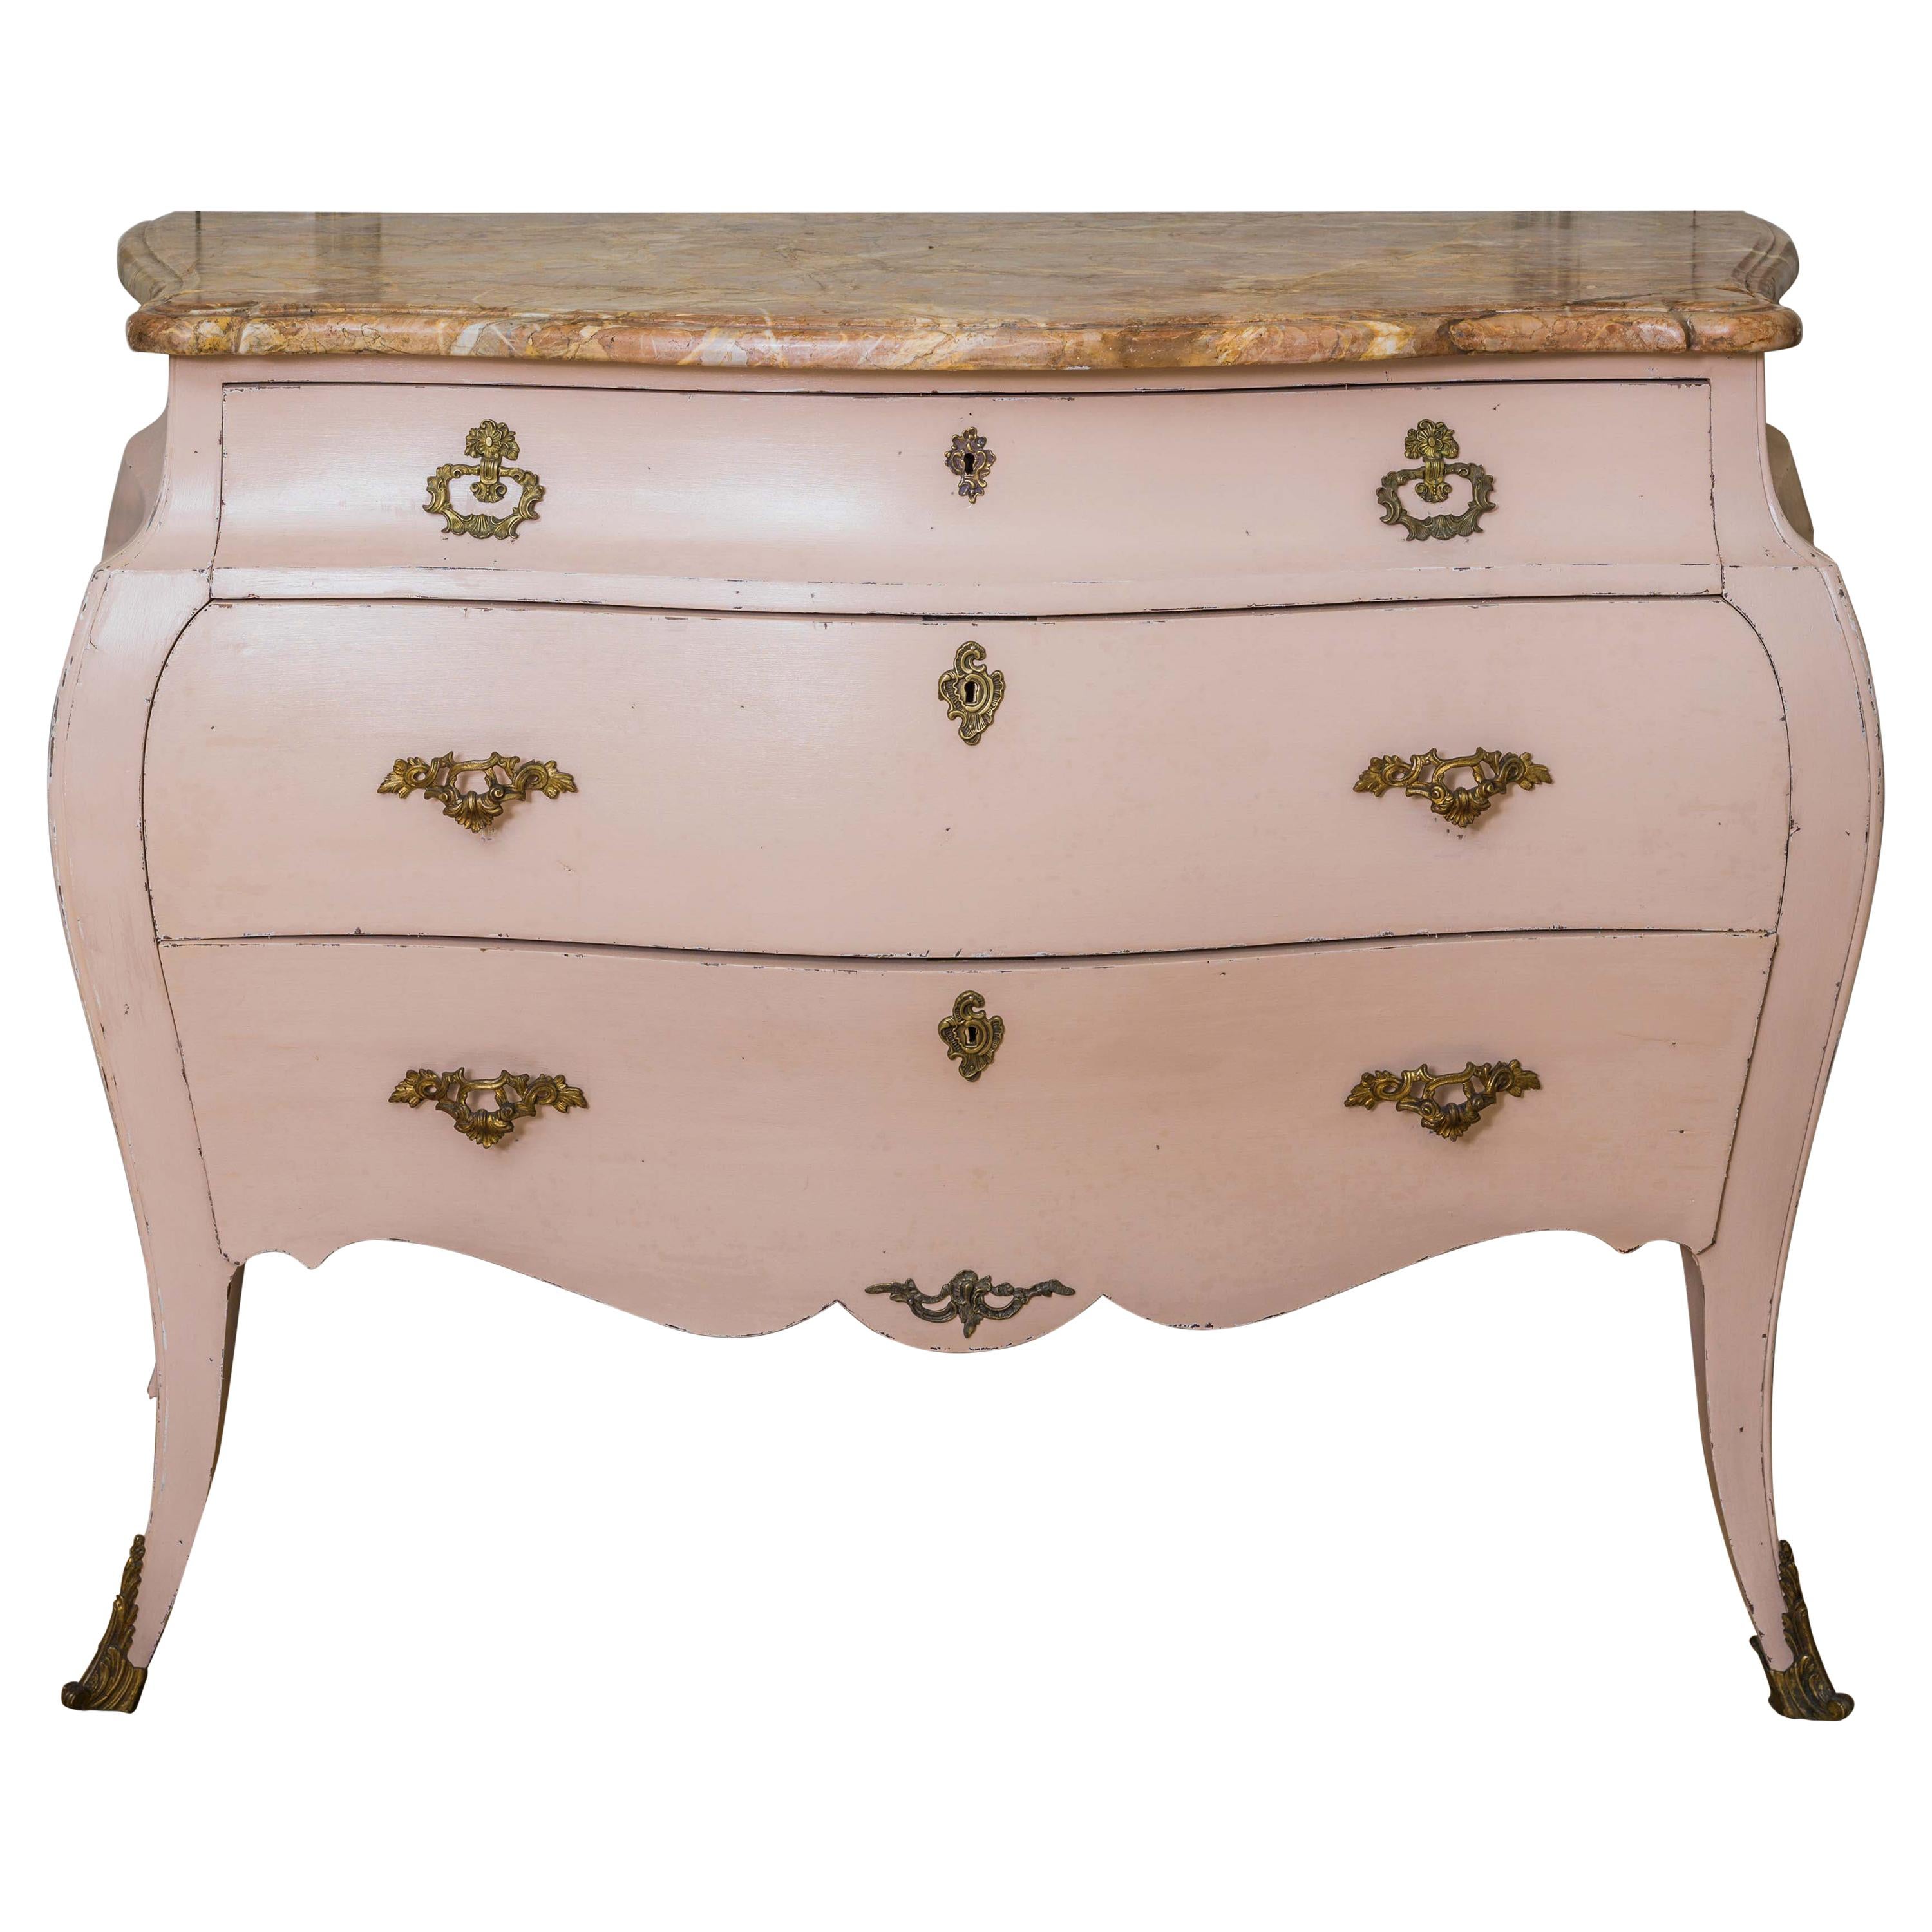 Late 19th Century Louis XV Style Bombe Chest of Drawers in Rose Pink Patina